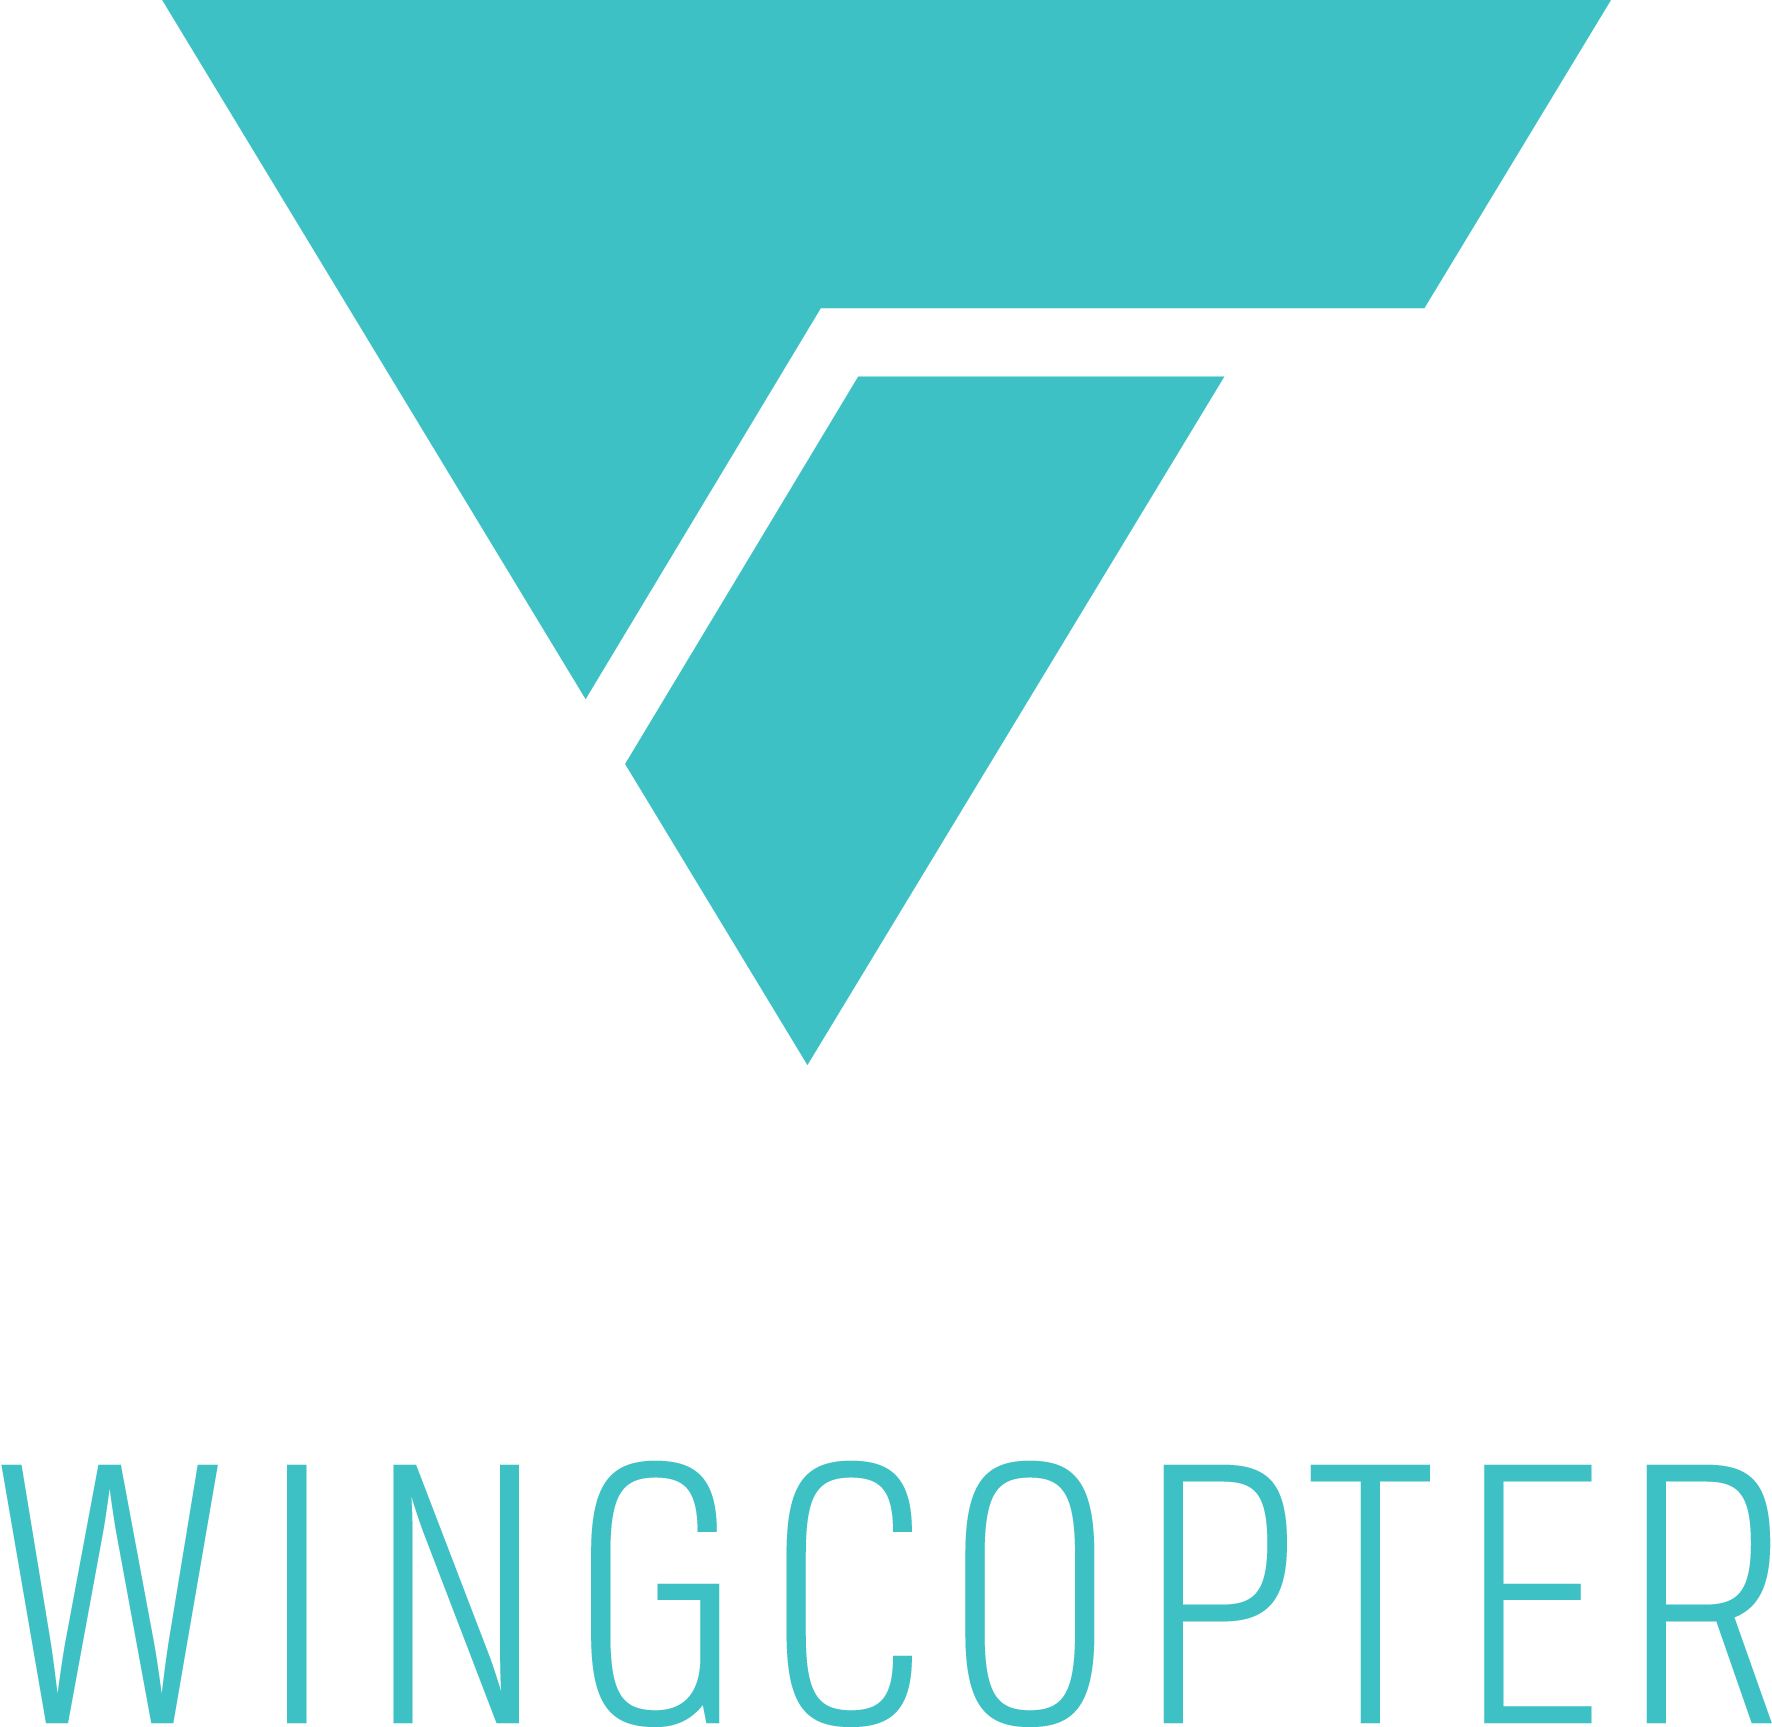 Wingcopter